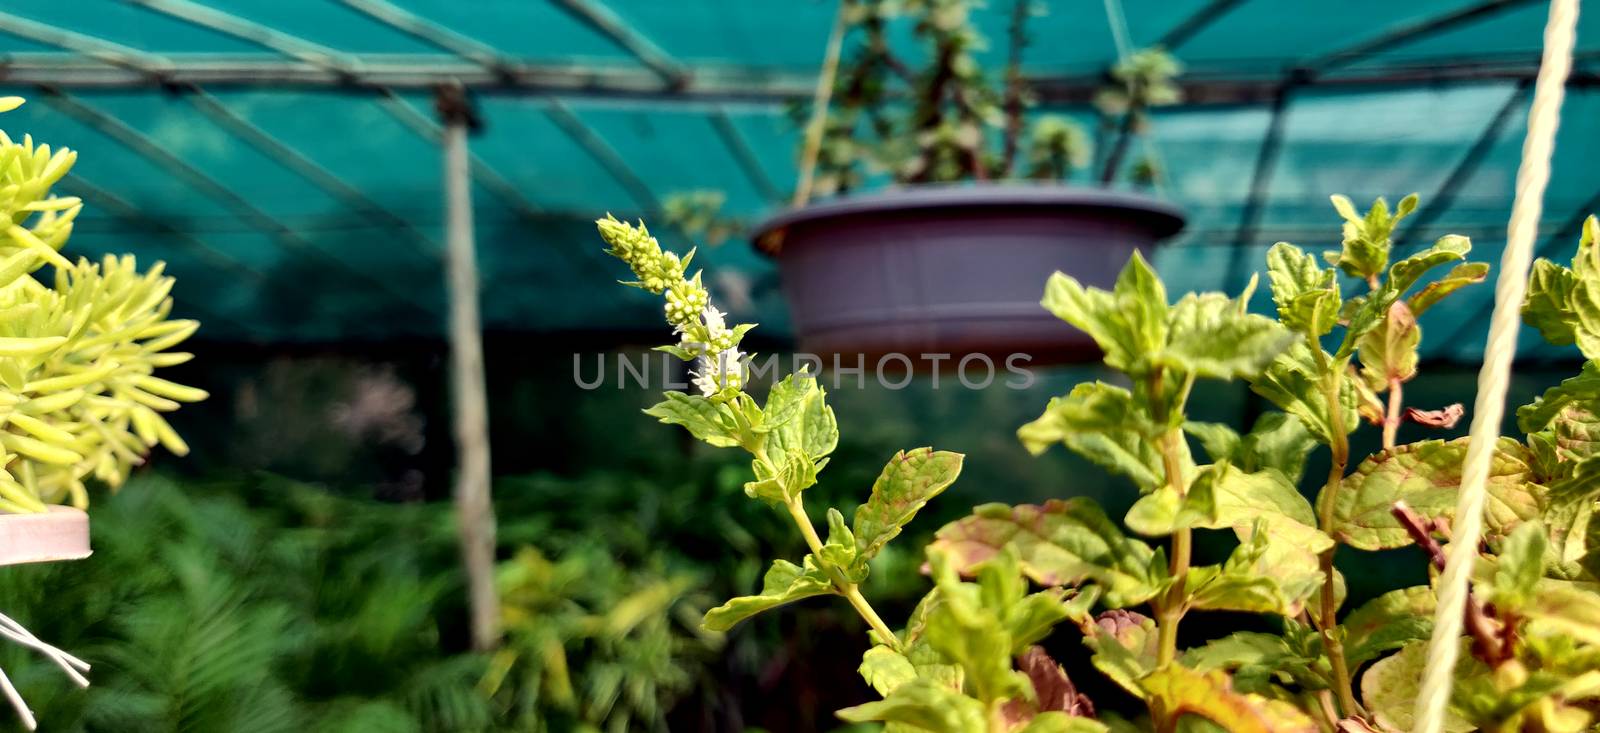 Flower of a spearmint plant in a nursery in New Delhi, India by mshivangi92